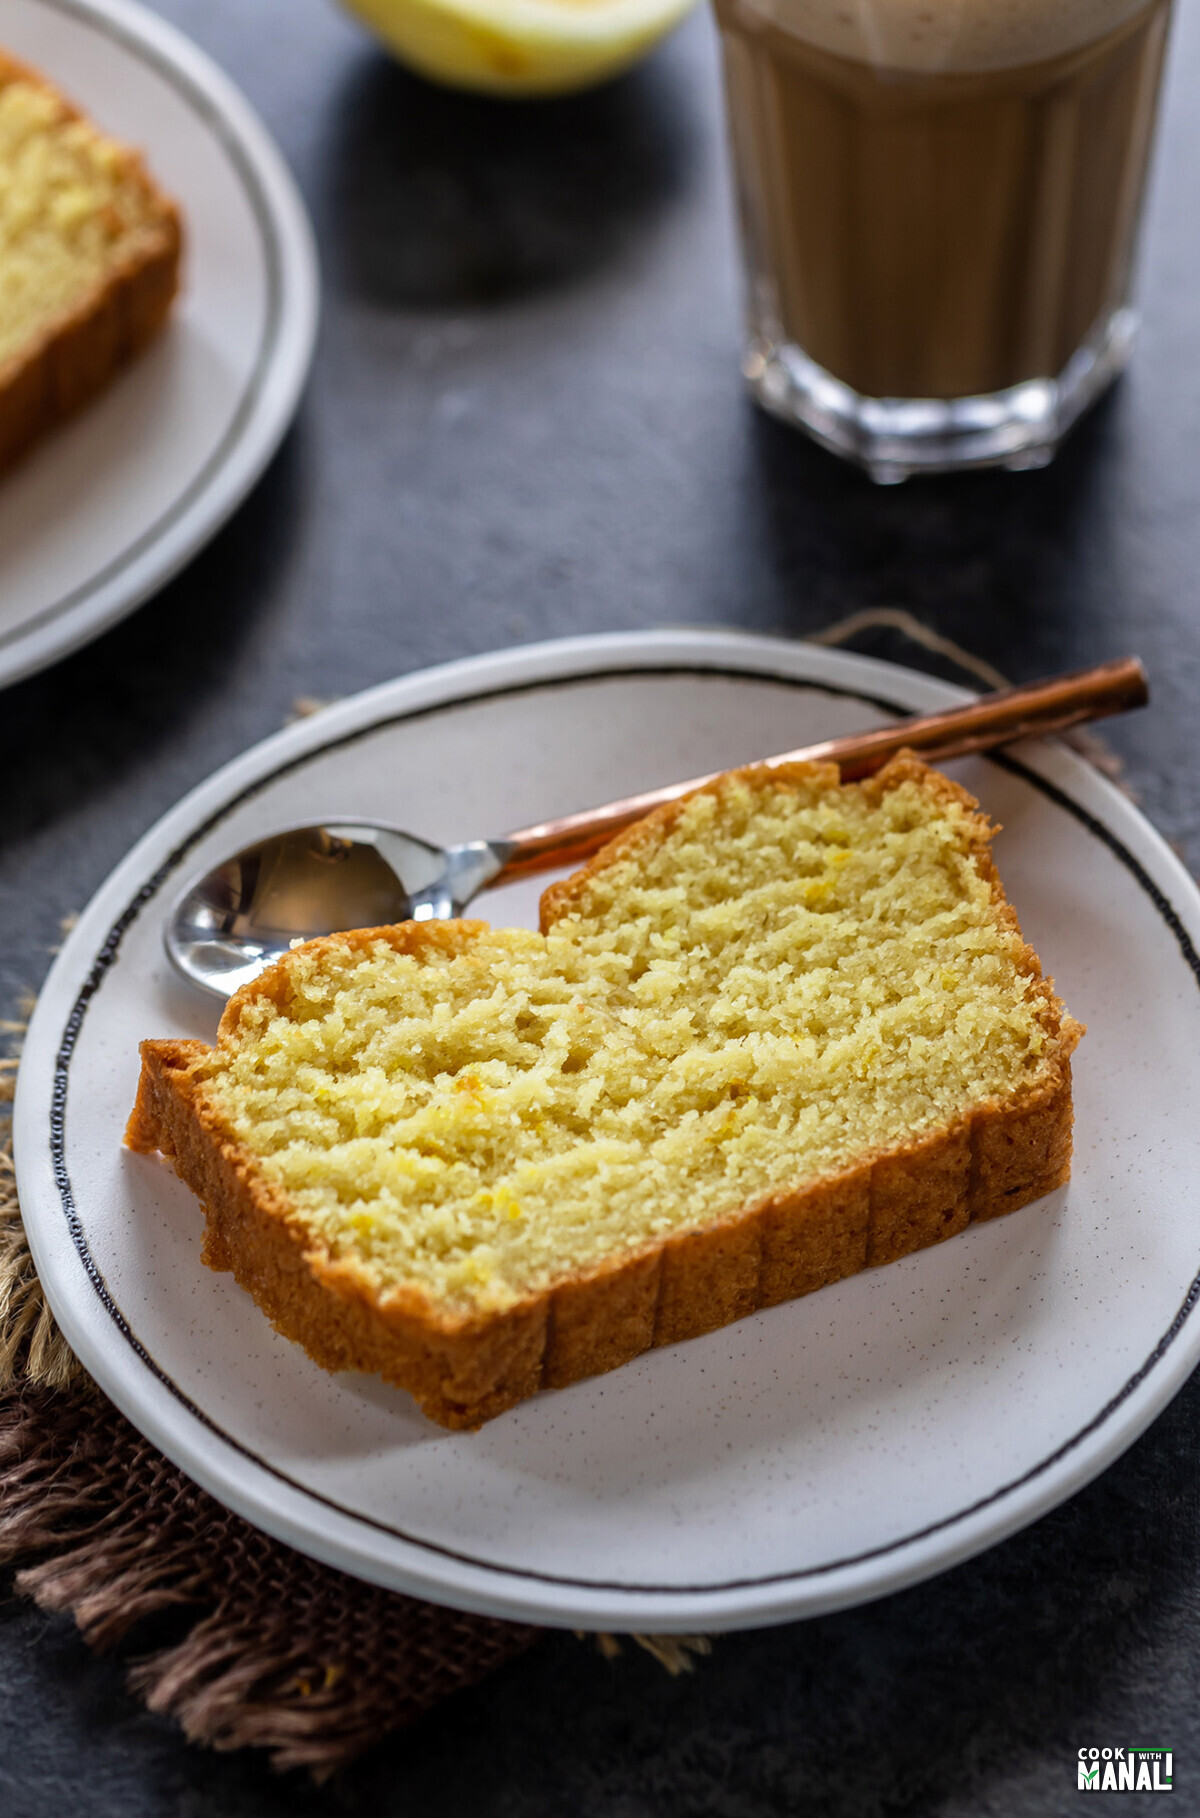 slice of lemon cake placed on a white plate with copper spoon on the side